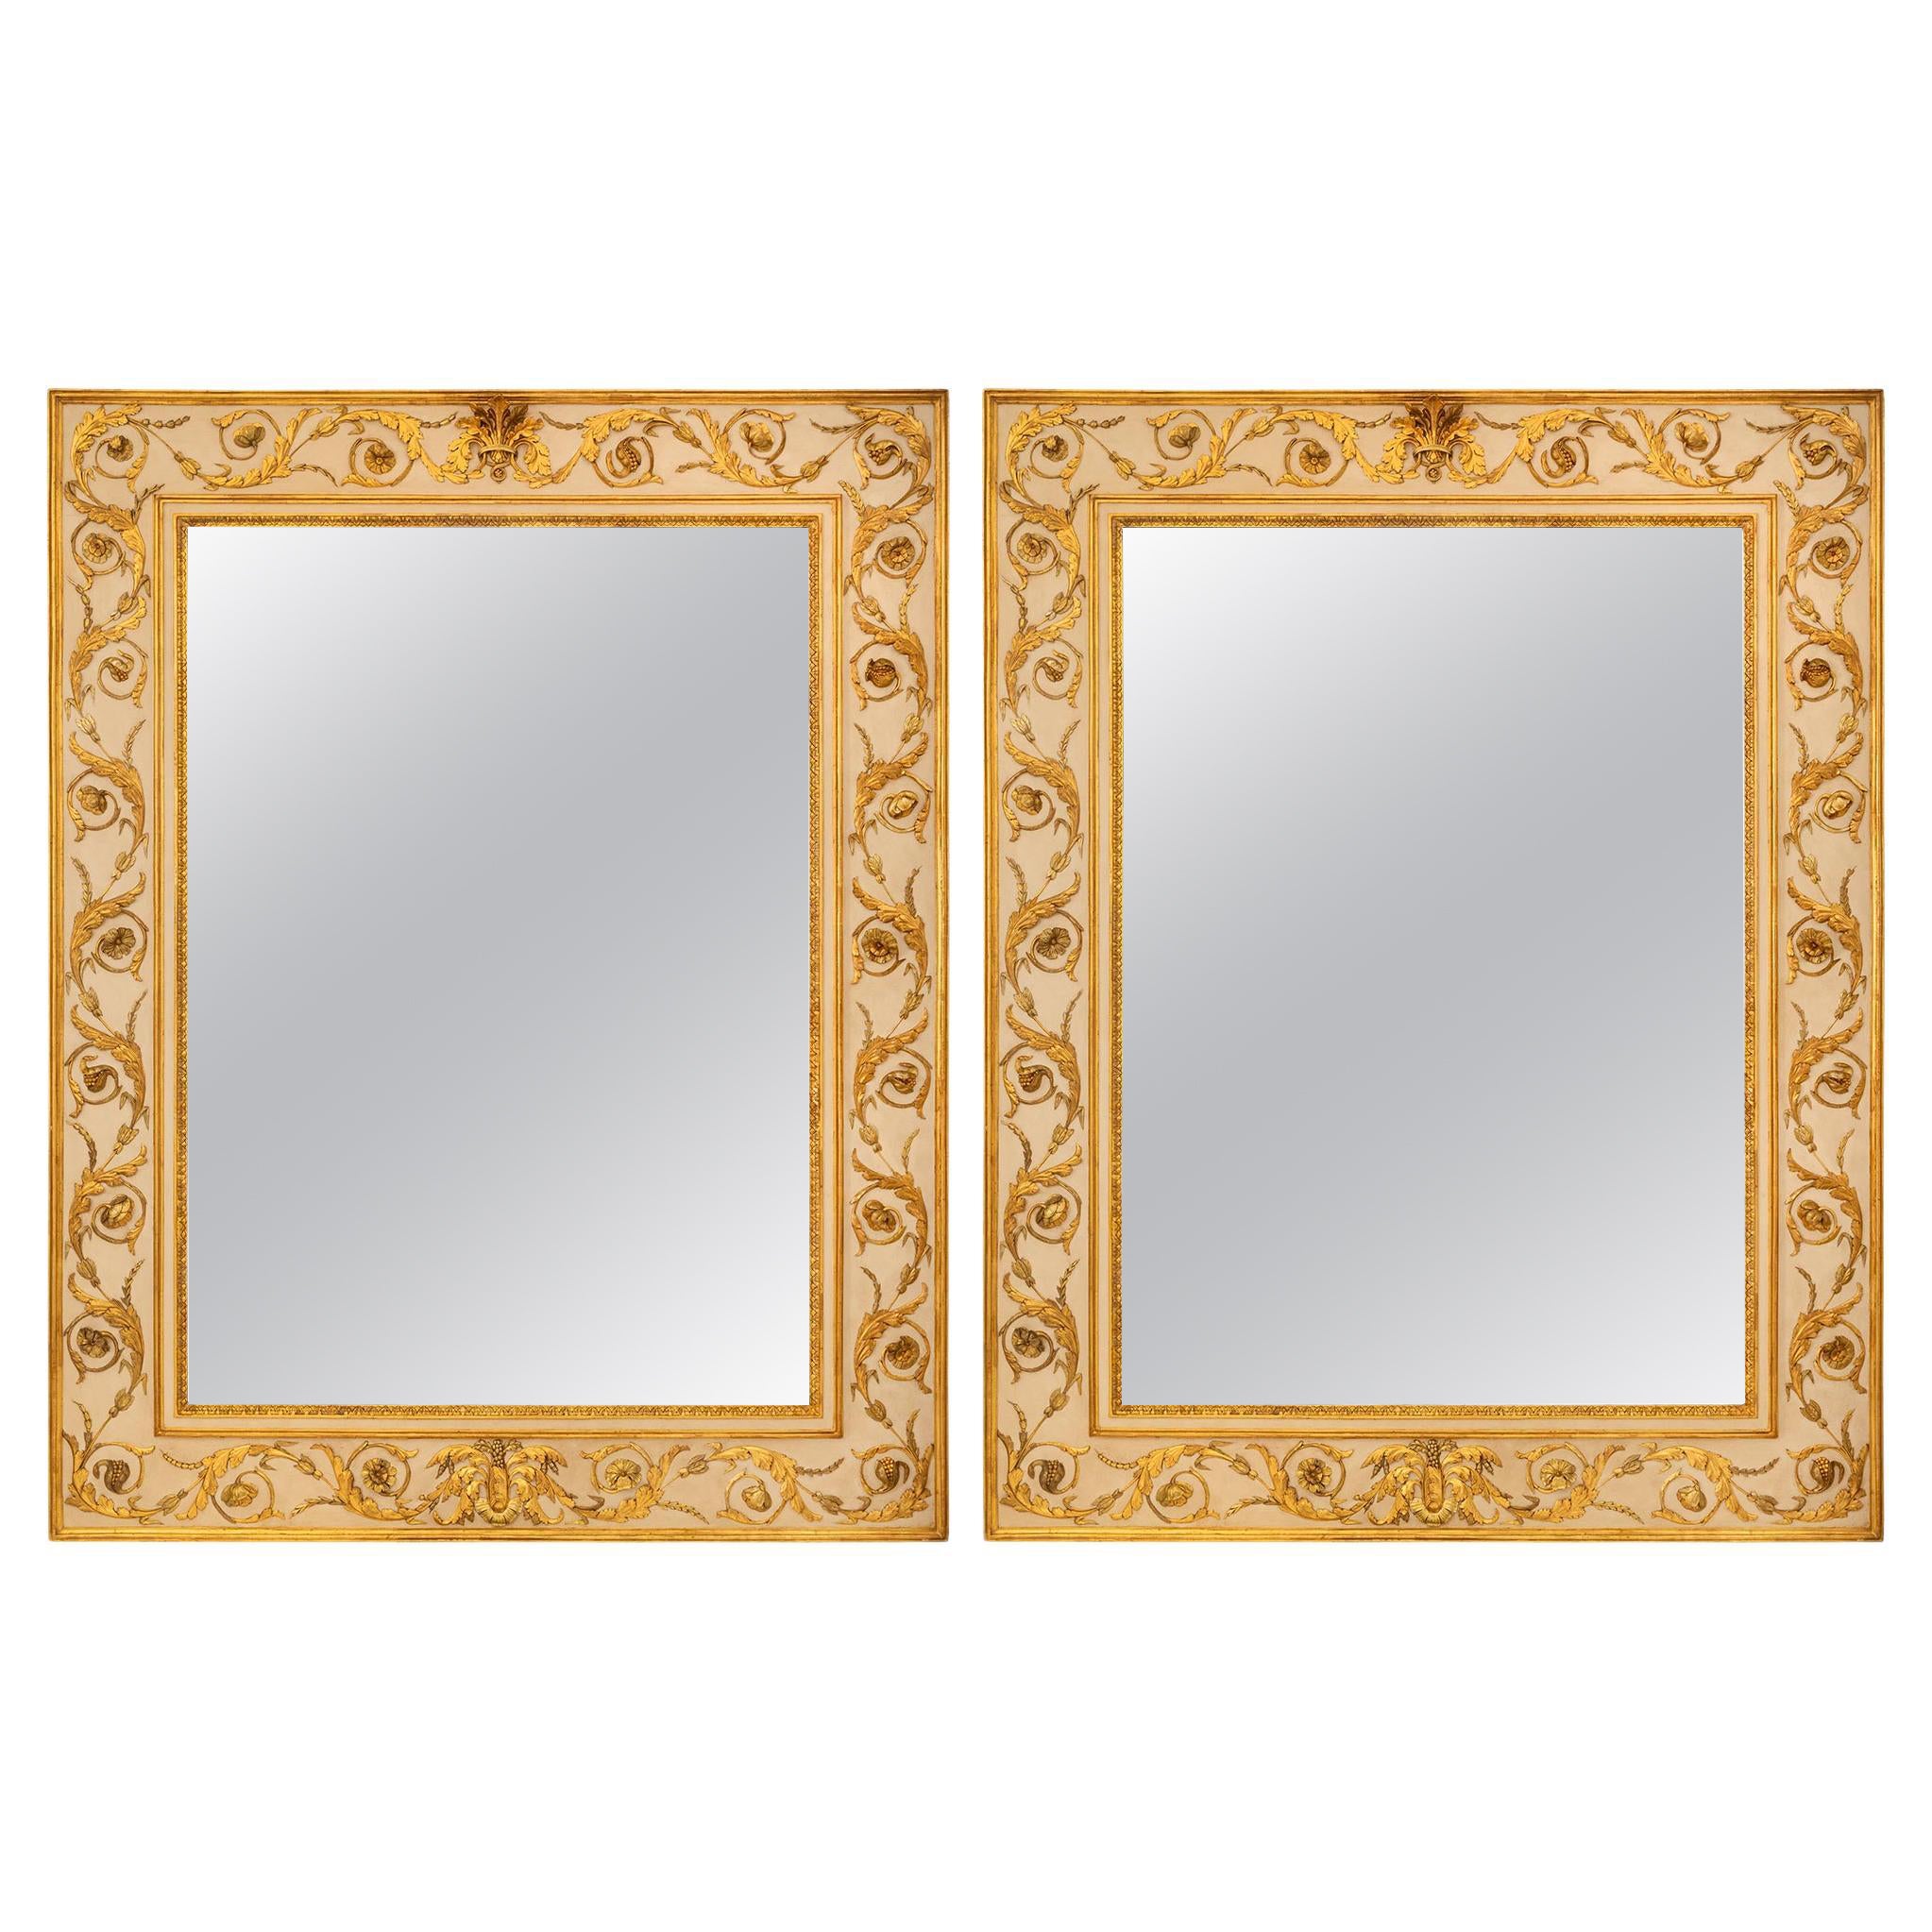 A pair of Italian early 19th century Neo-classical mirrors For Sale